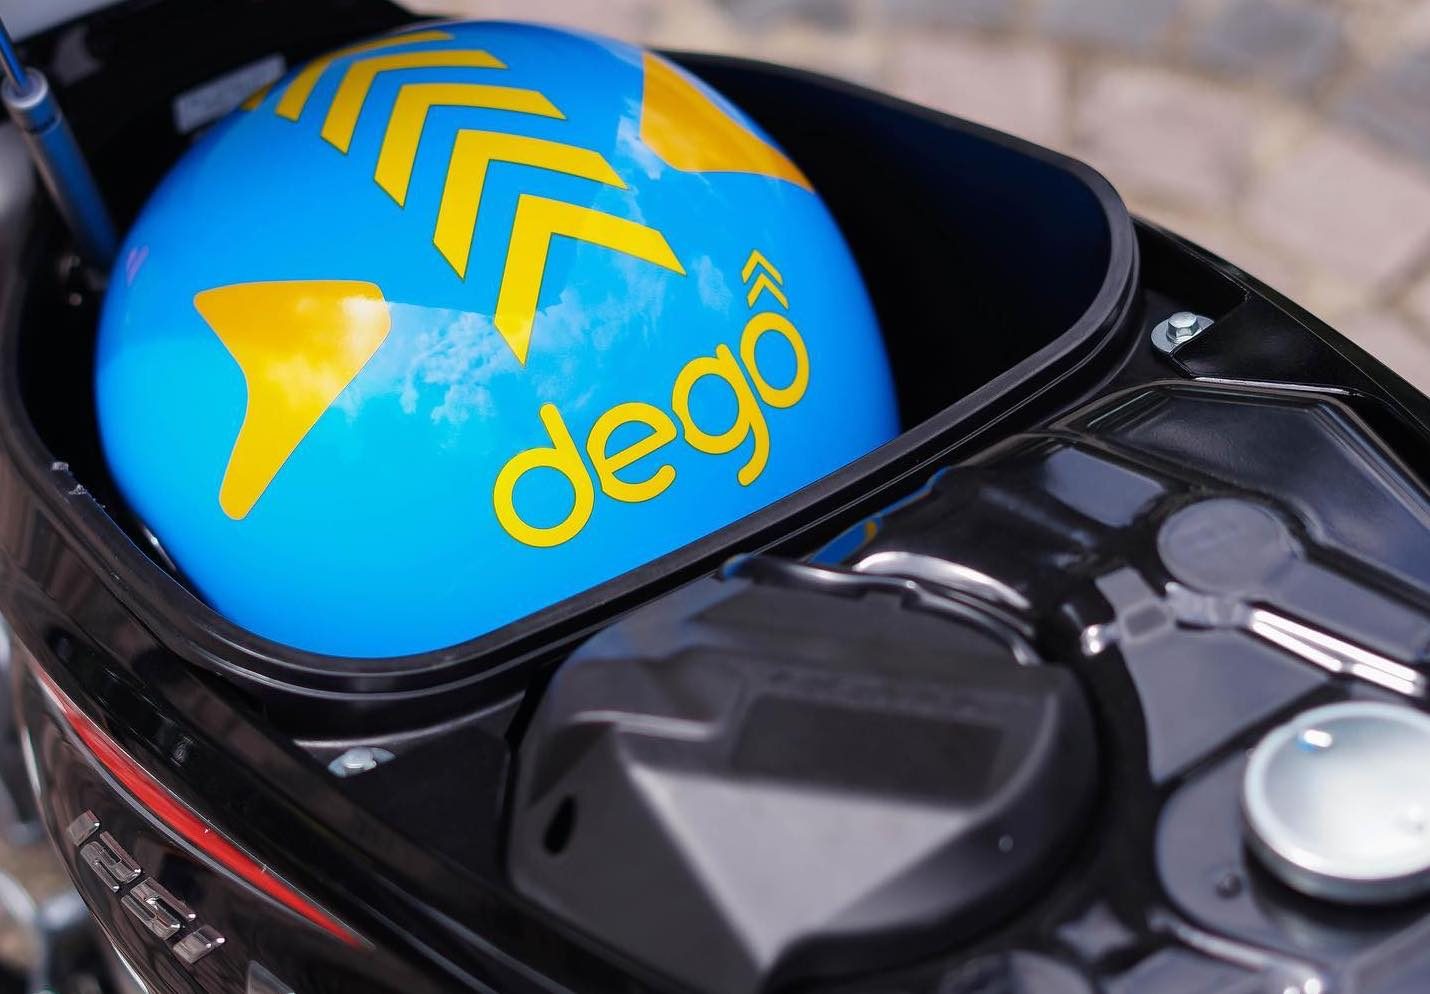 Malaysian bike-hailing firm Dego Ride seeks to raise $45m from PE firms